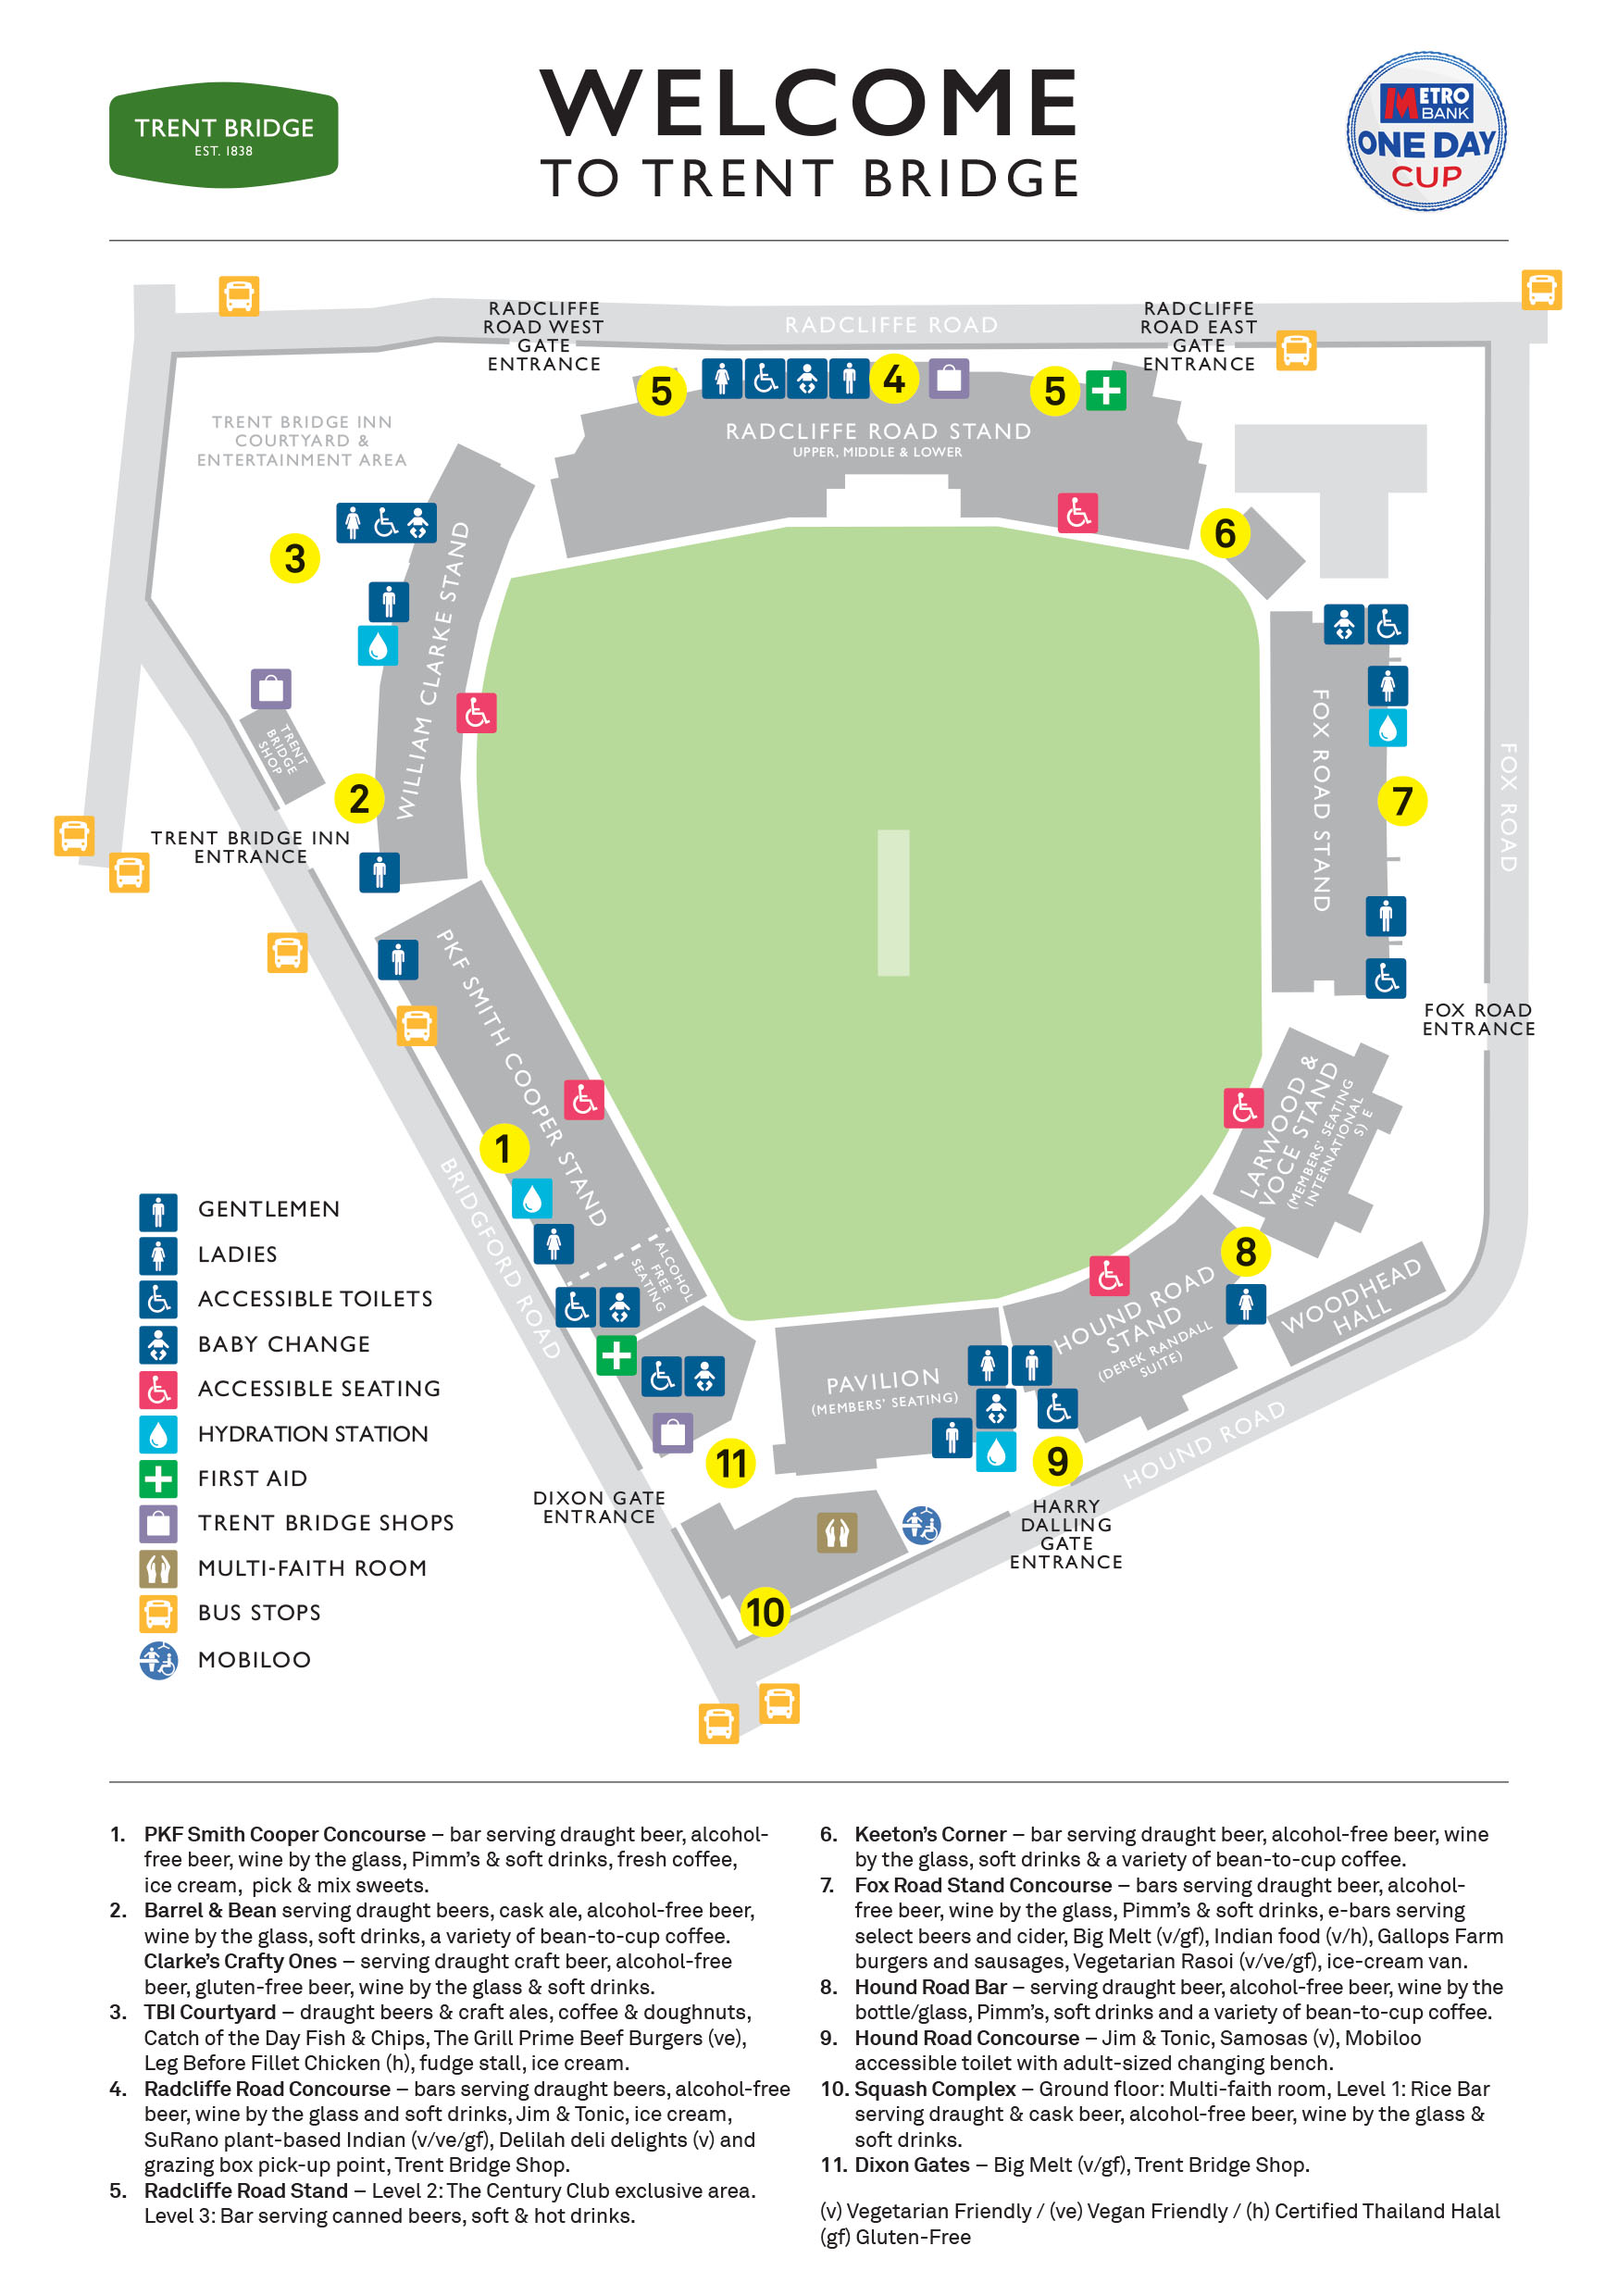 Matchday Information Guide, Official Site